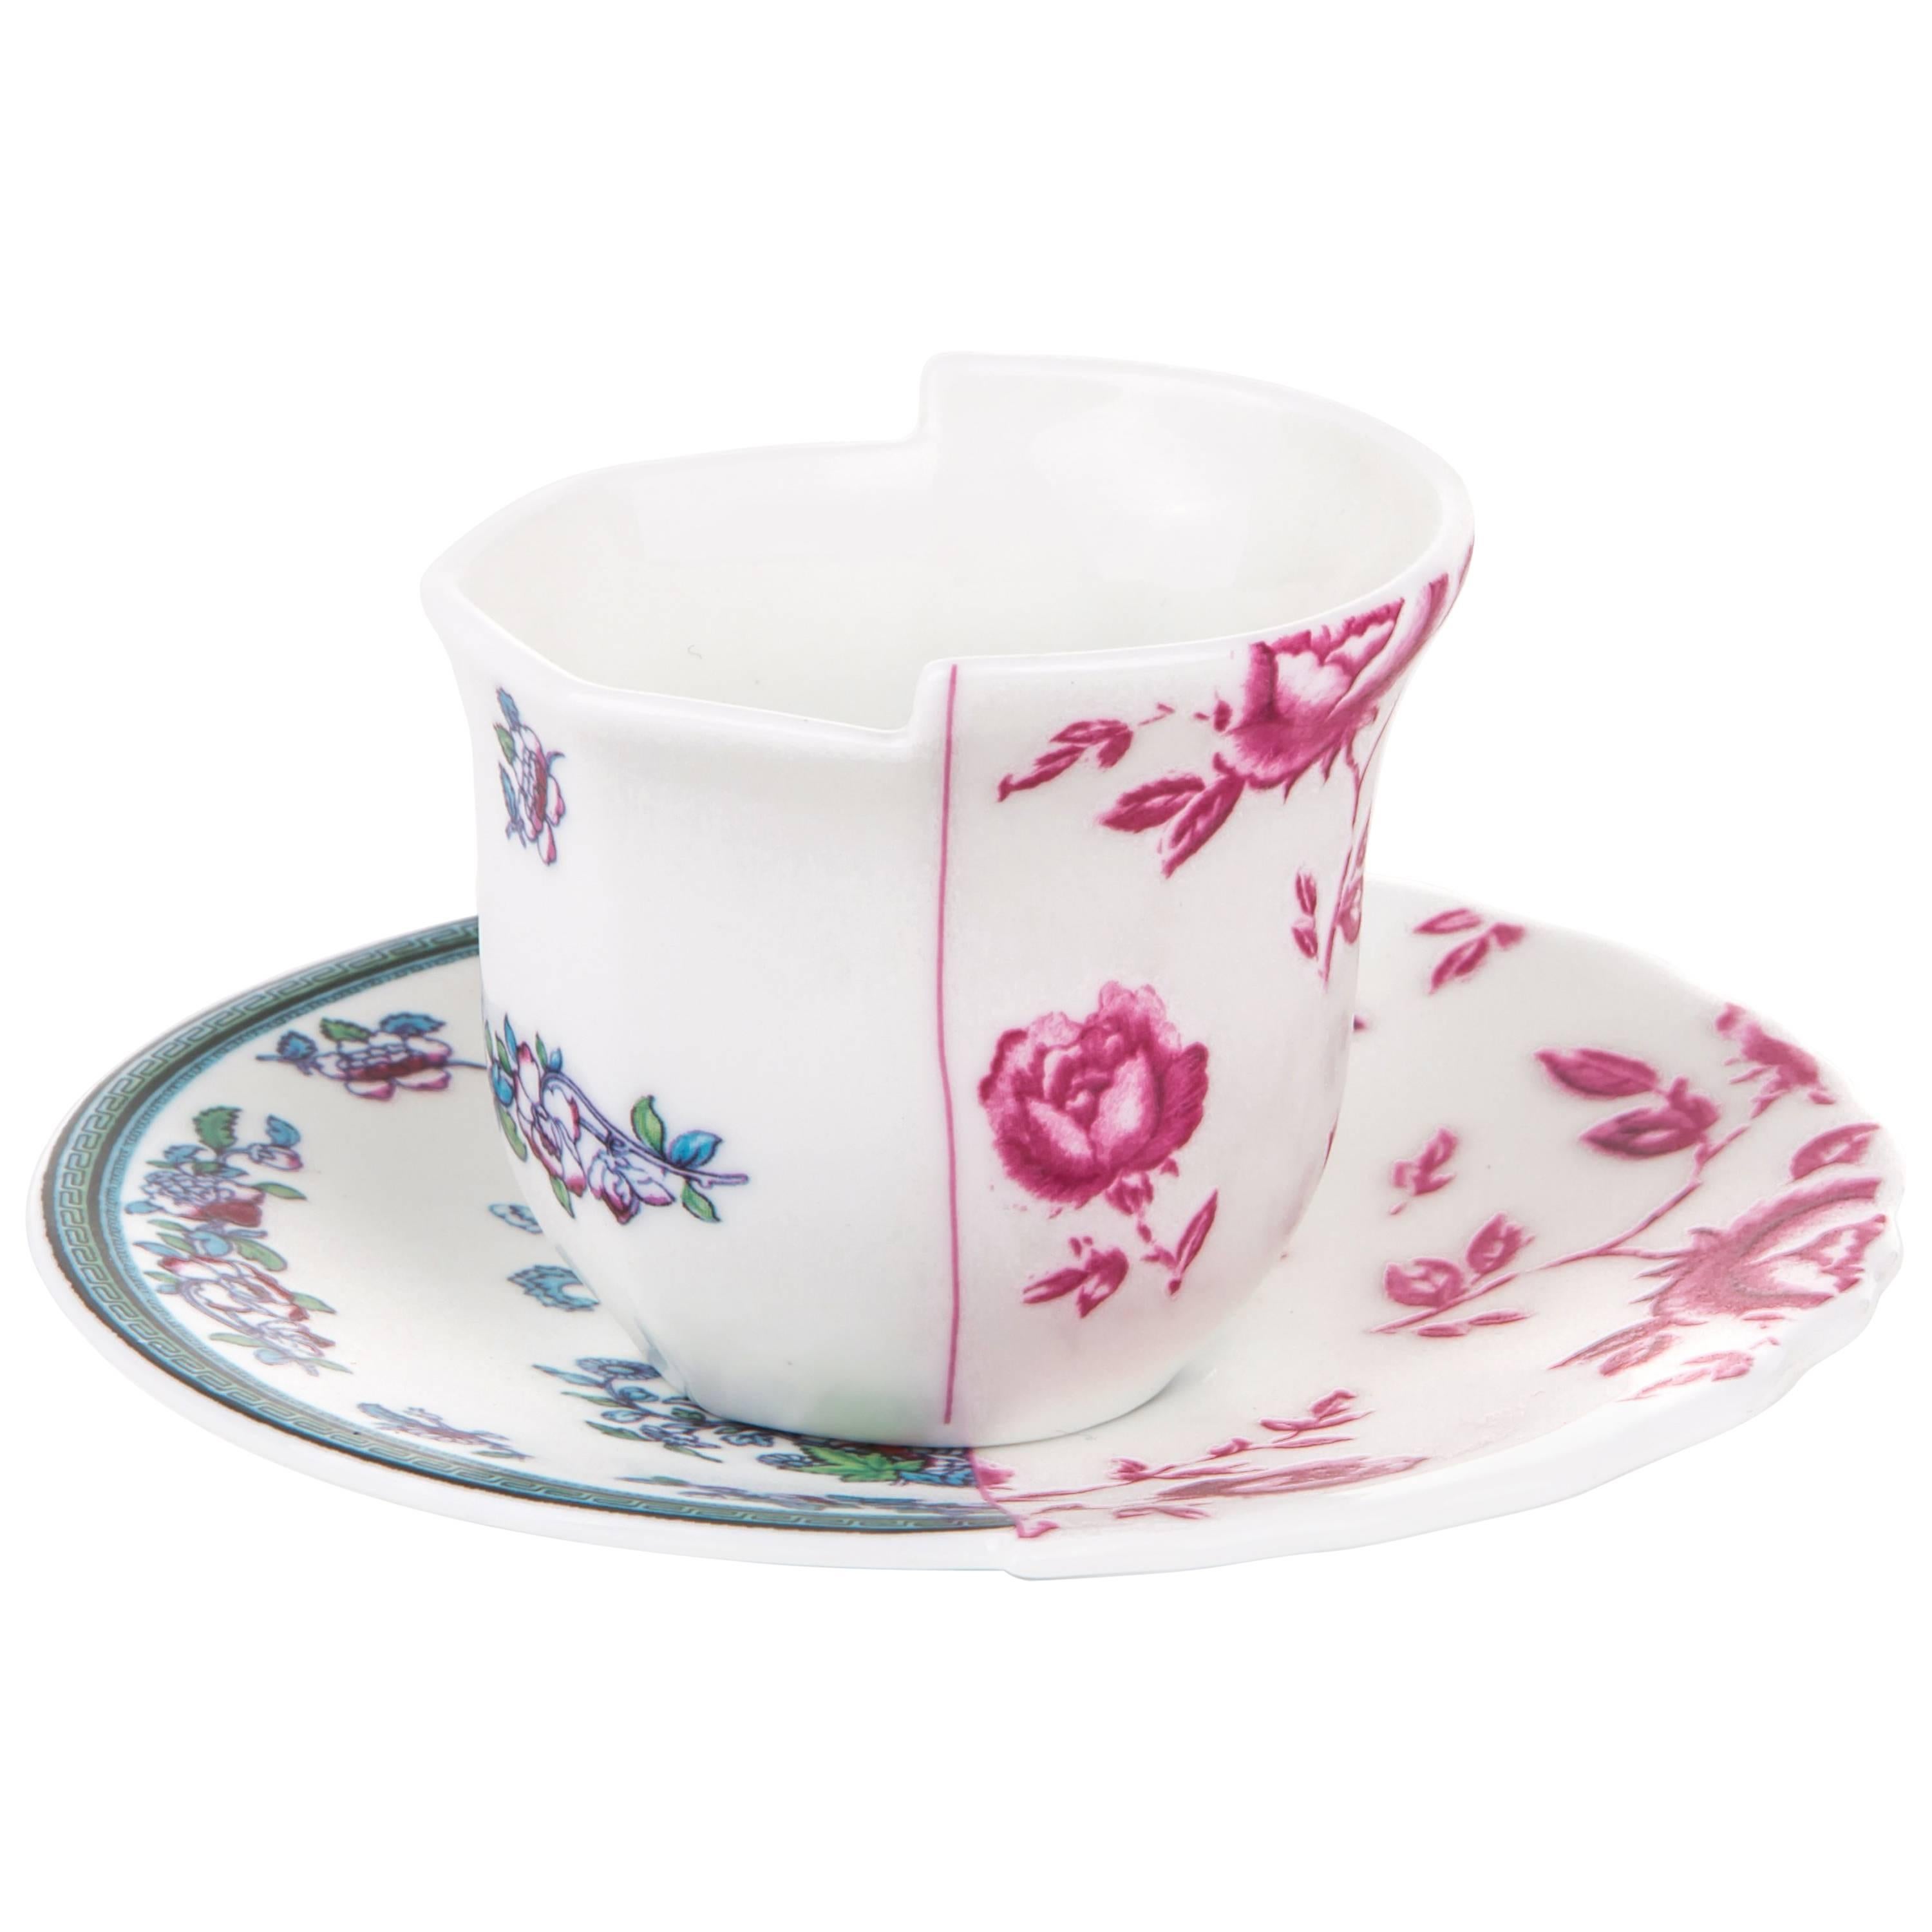 Seletti 'Hybrid-Leonia' Coffee Cup with Saucer in Porcelain